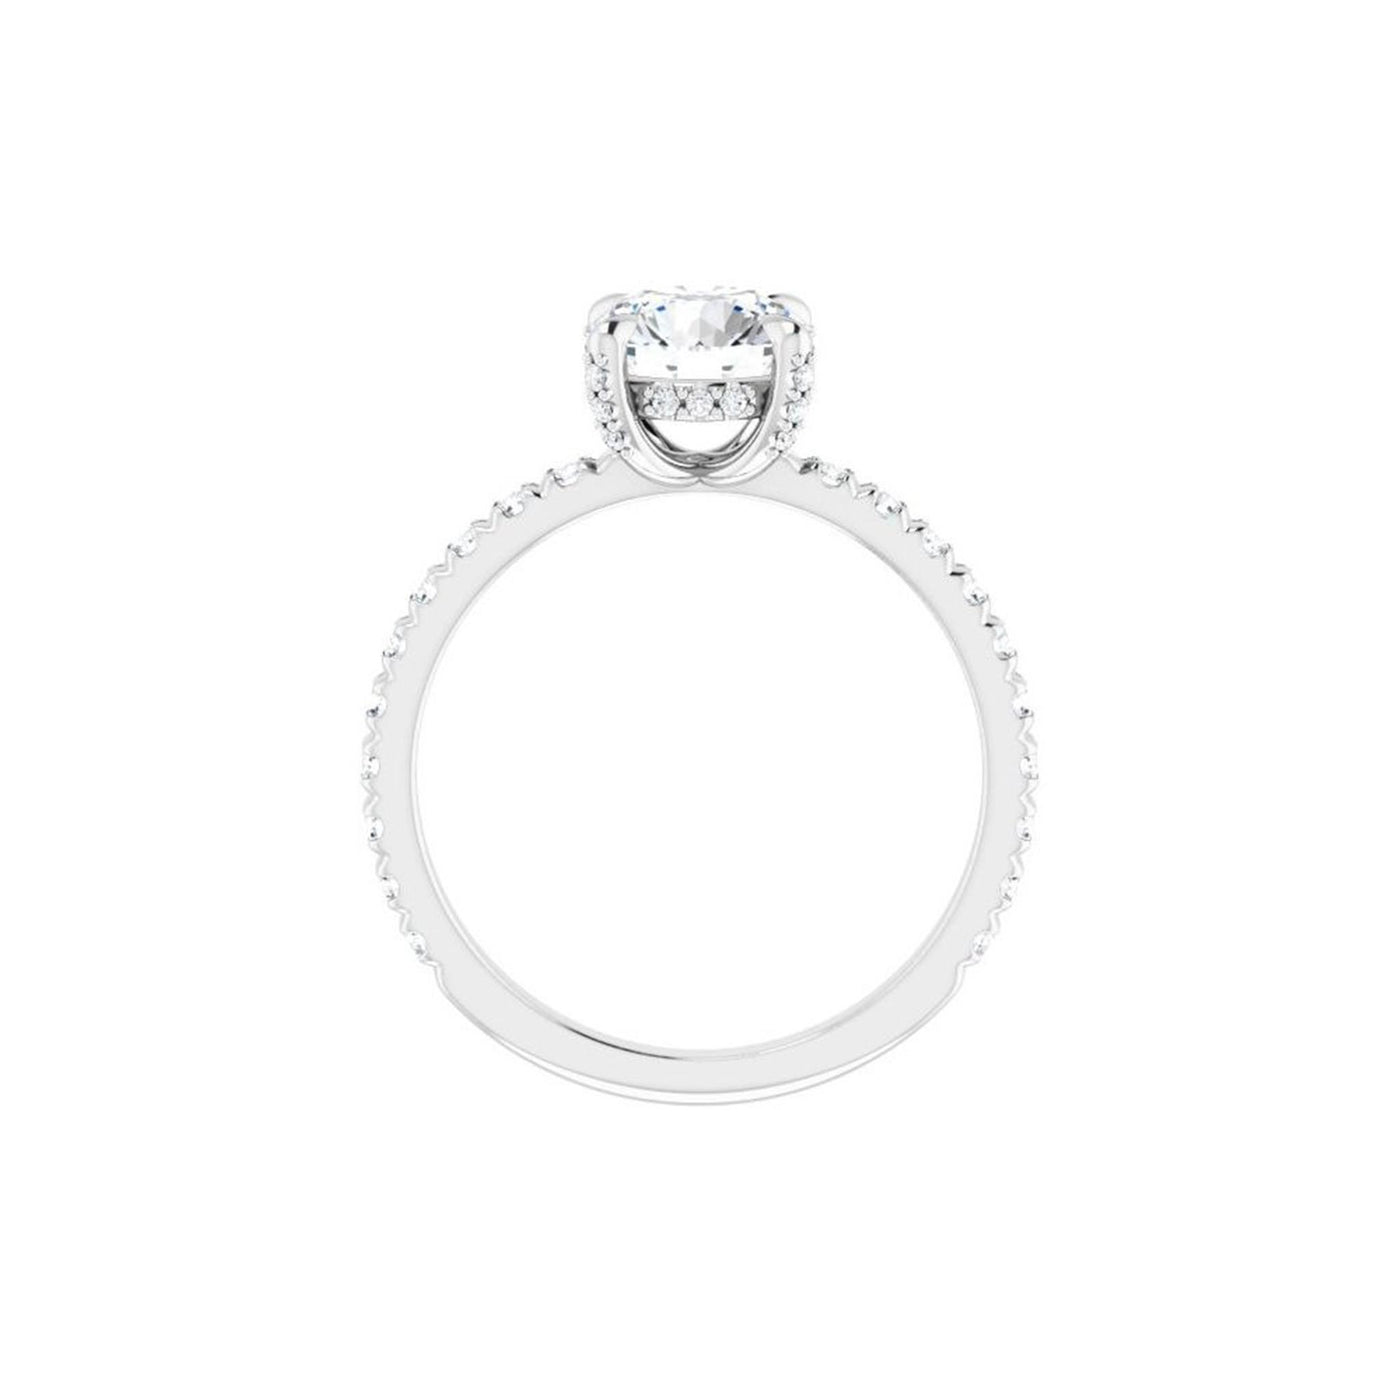 Ever & Ever 14K White Gold .50ctw 4 Prong Style Diamond Semi-Mount Engagement Ring